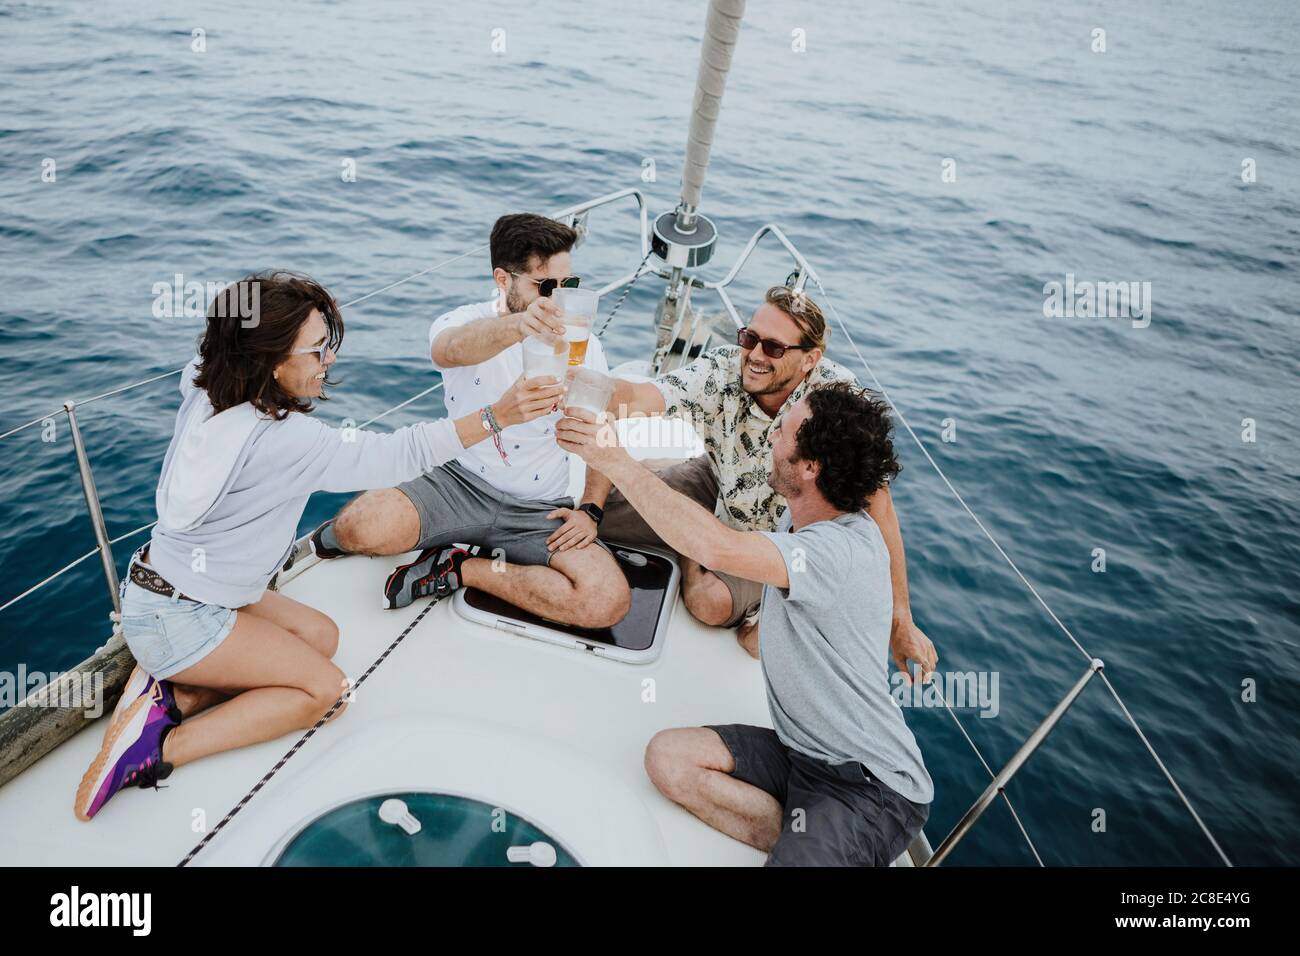 Carefree friends toasting beer glasses while sitting on sailboat in sea Stock Photo